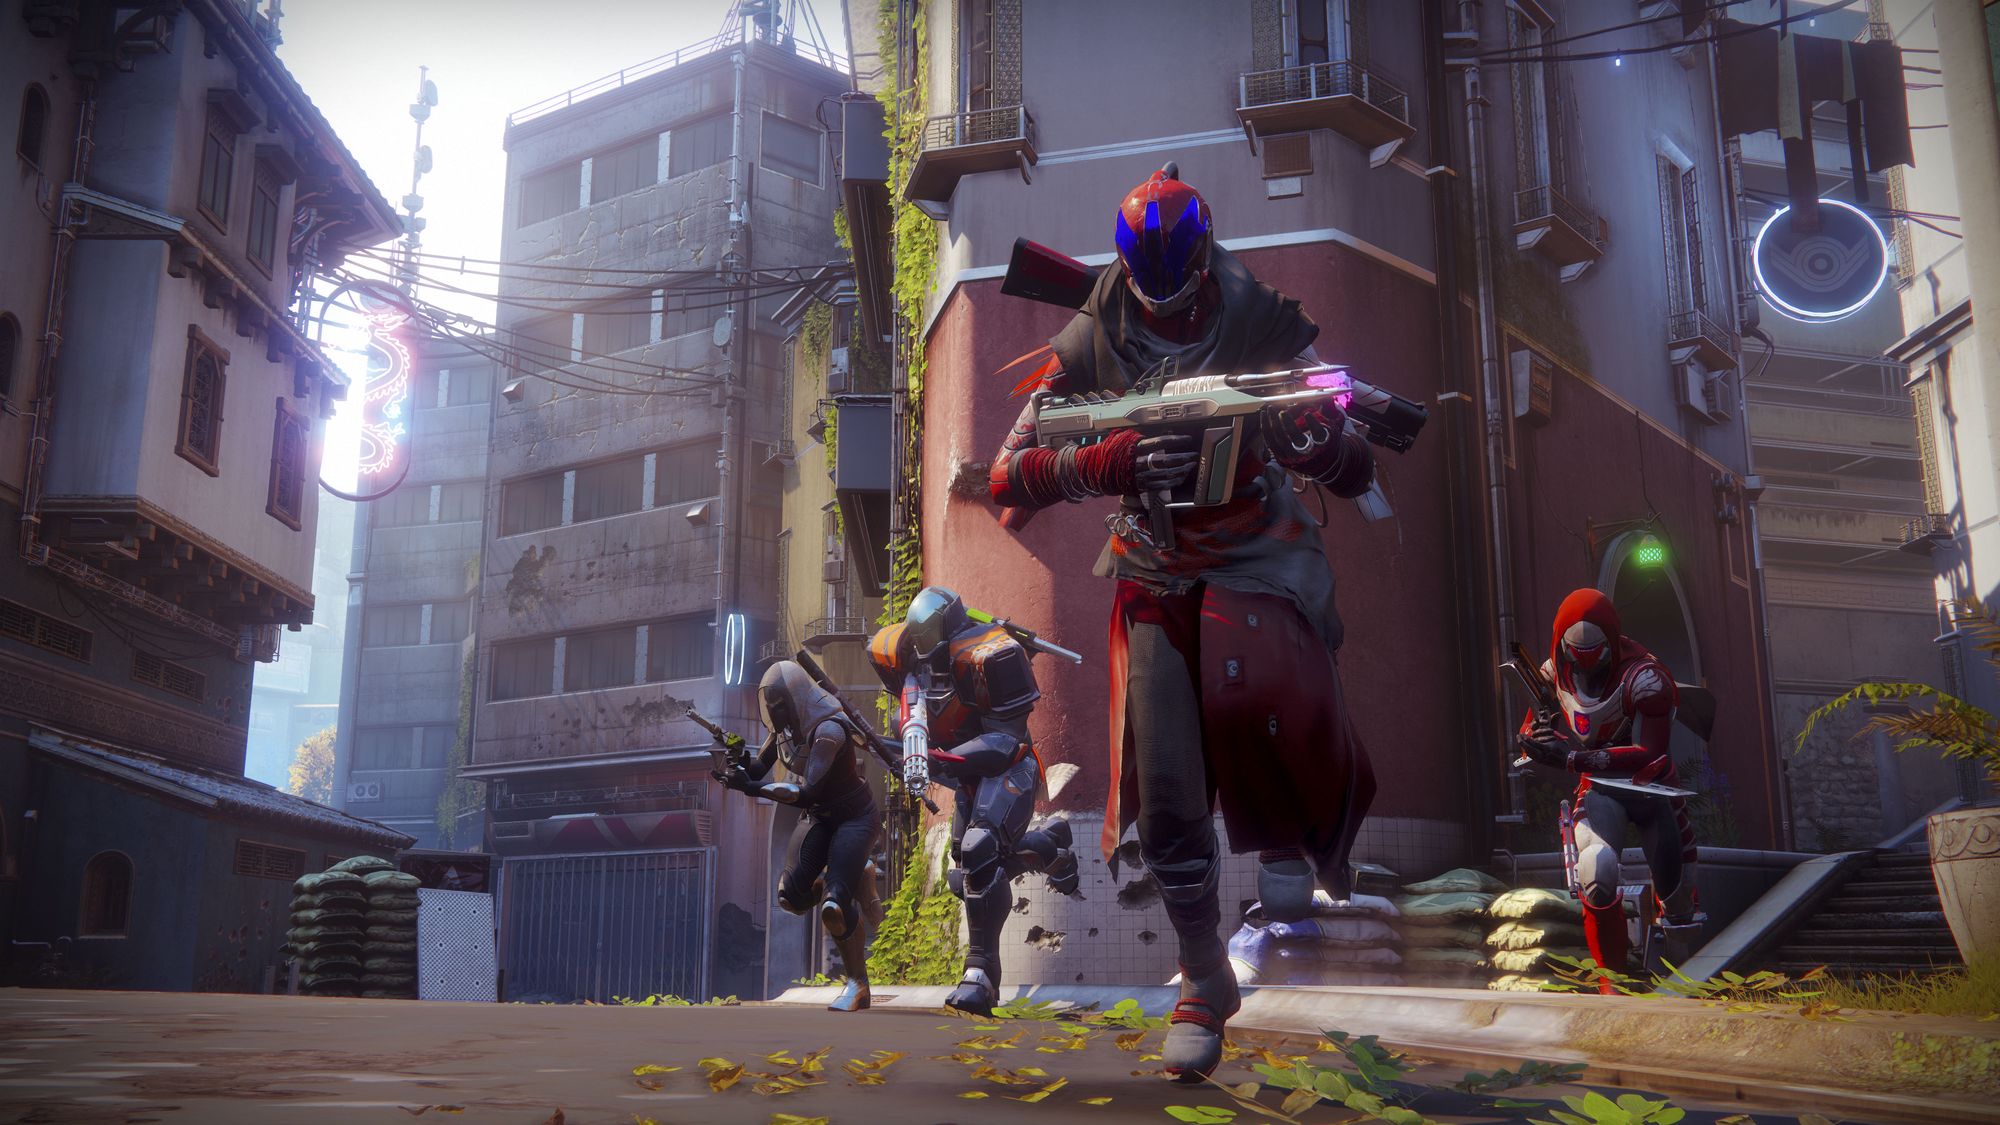 Skill Based Matchmaking is Coming to Destiny 2